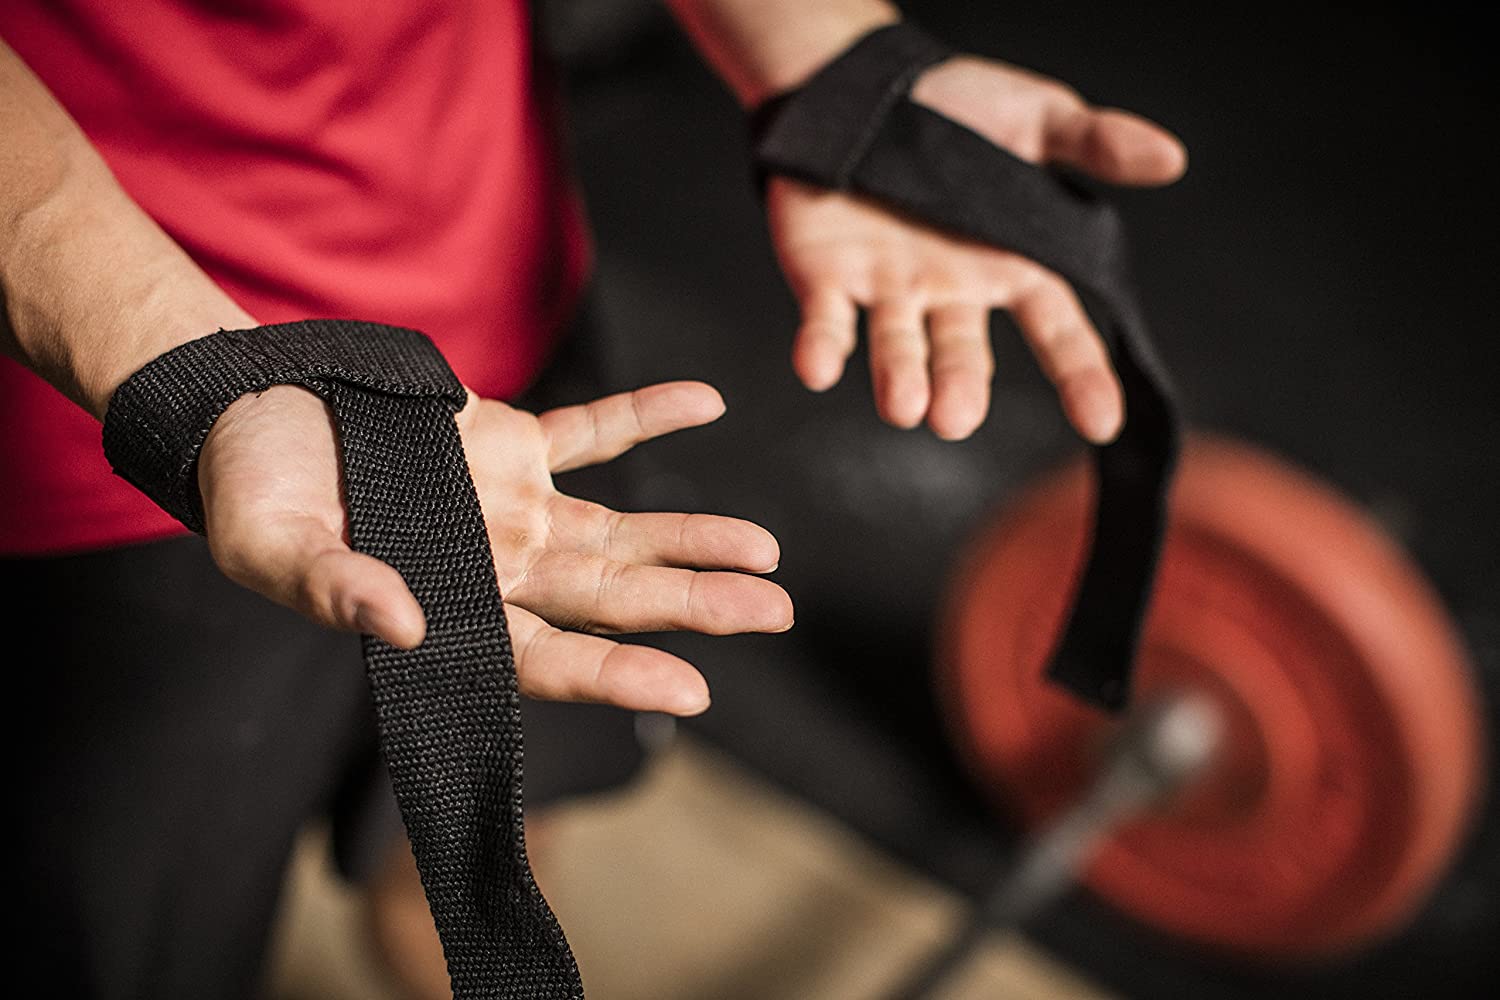 How To Use Lifting Straps: 5 Easy Steps To Lift More Weight